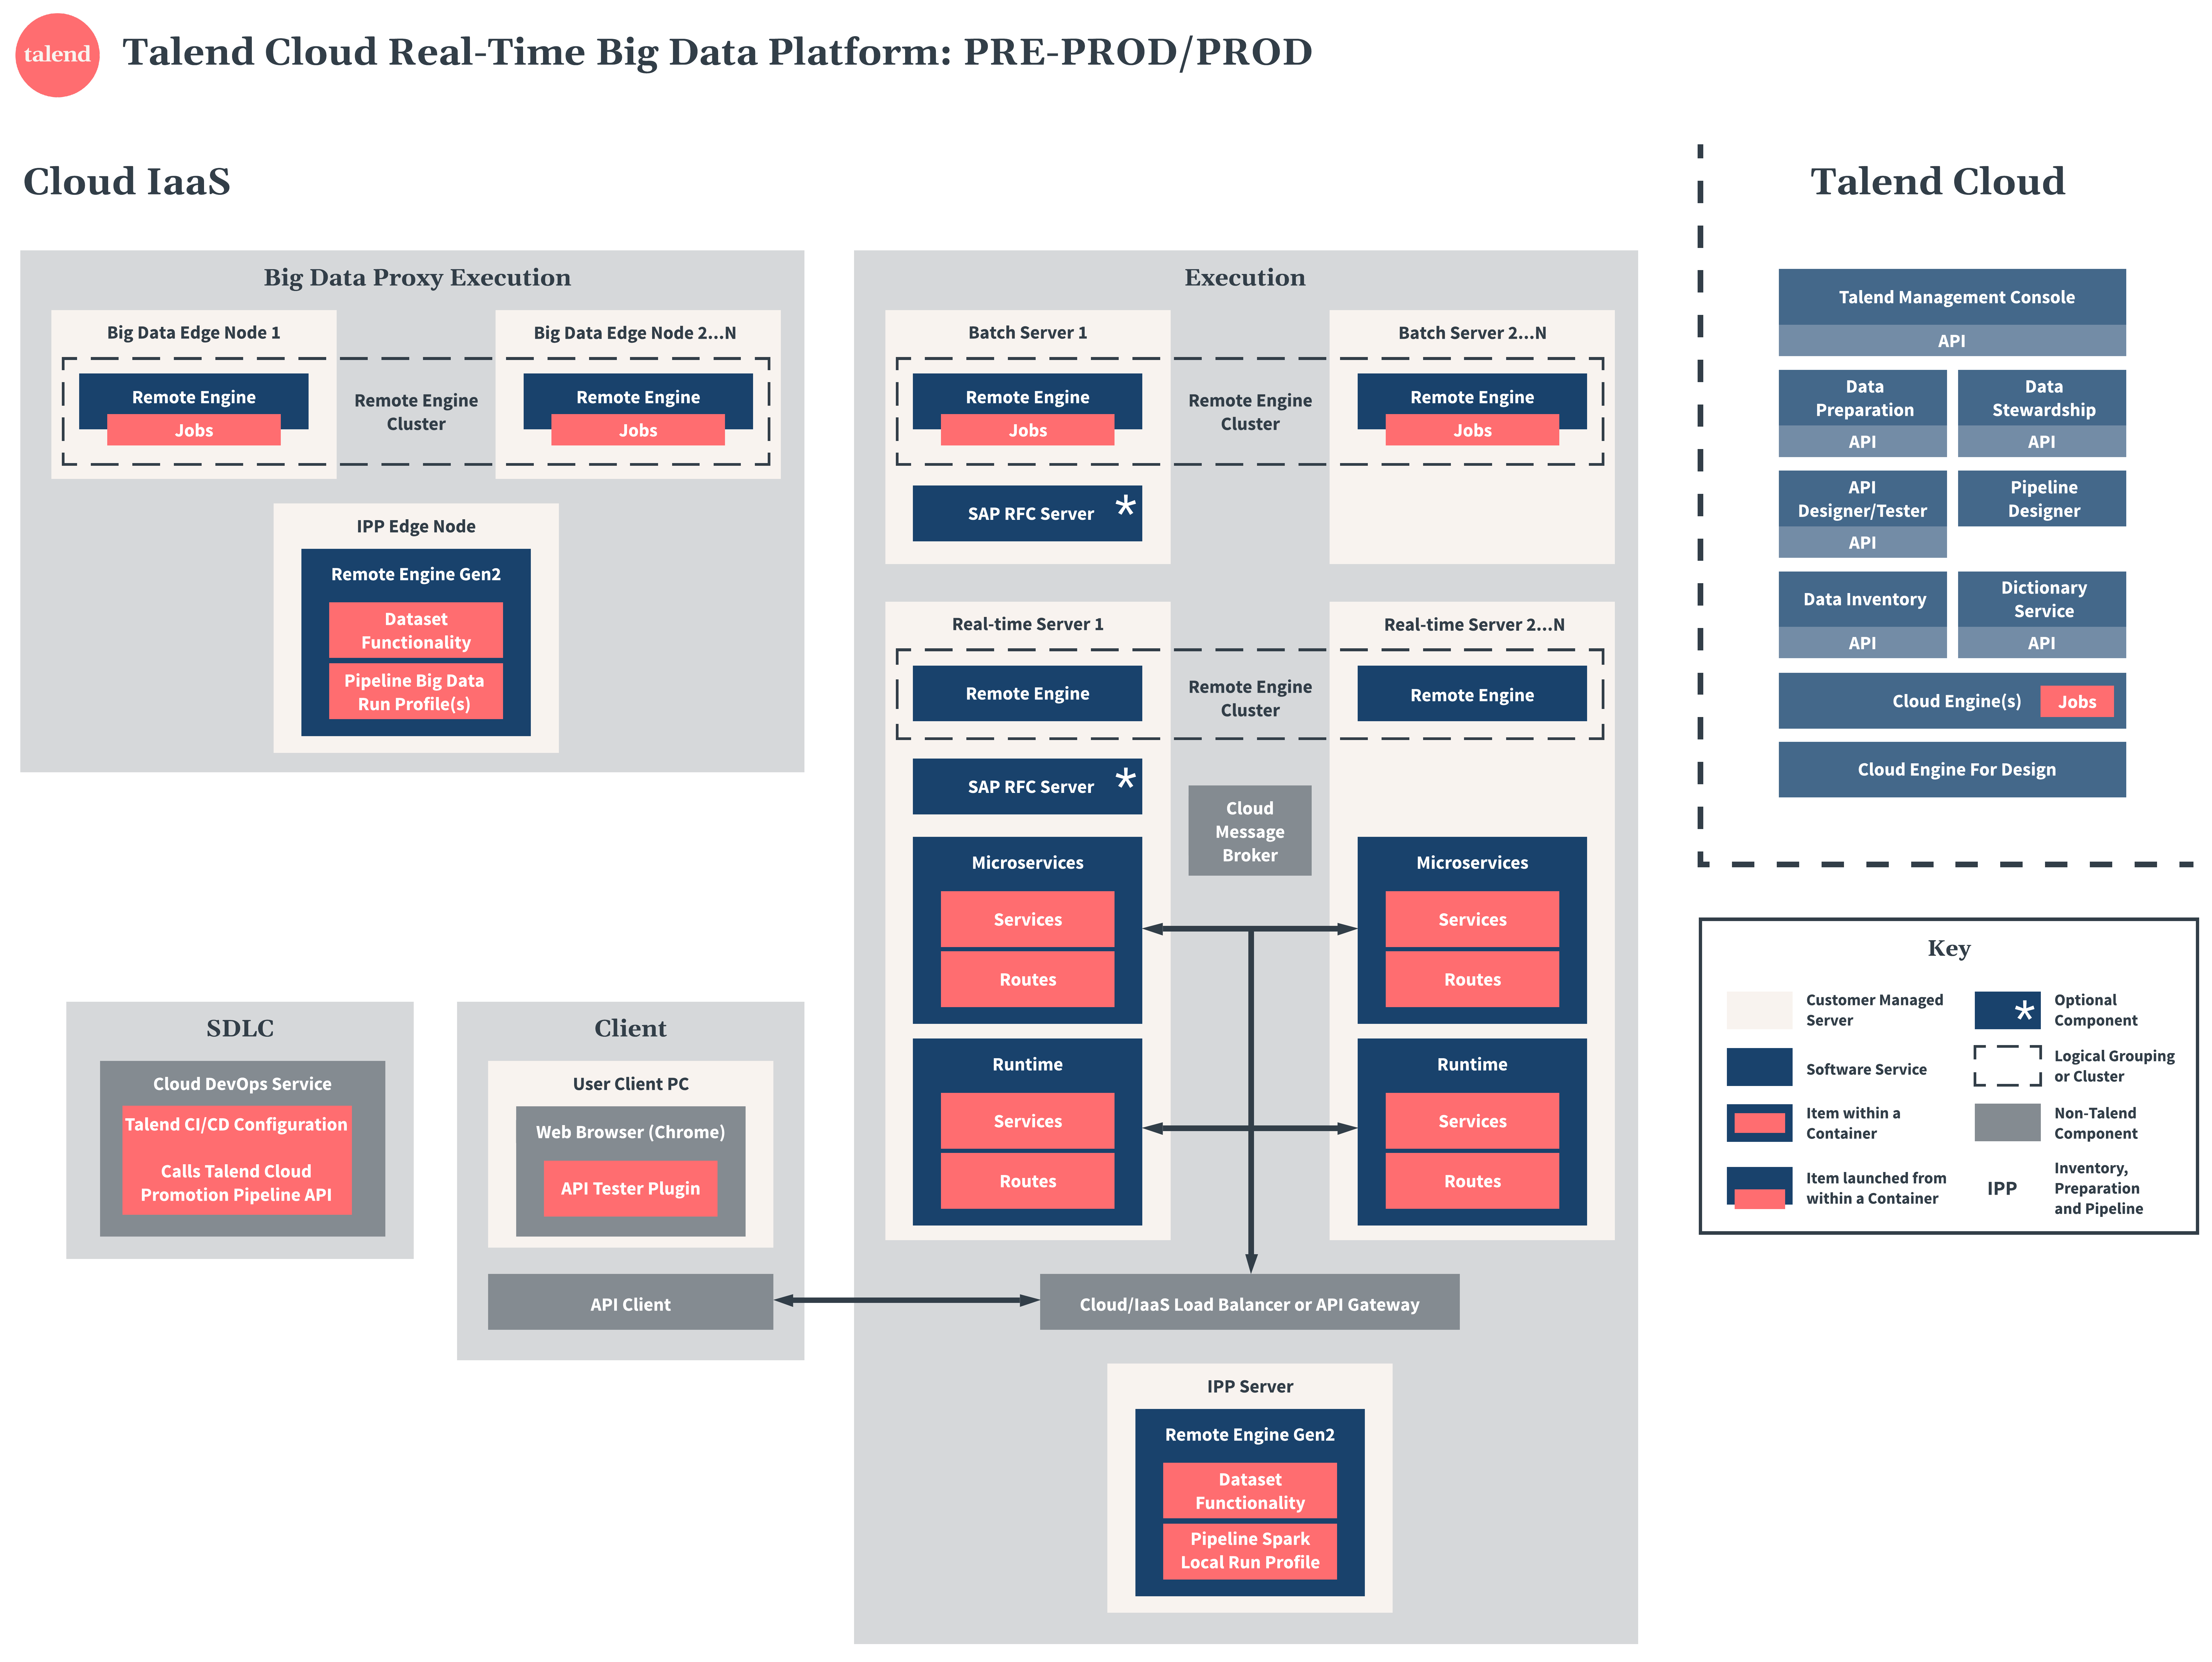 Talend Cloud Real-Time Big Data Platform pre-production and production diagram.